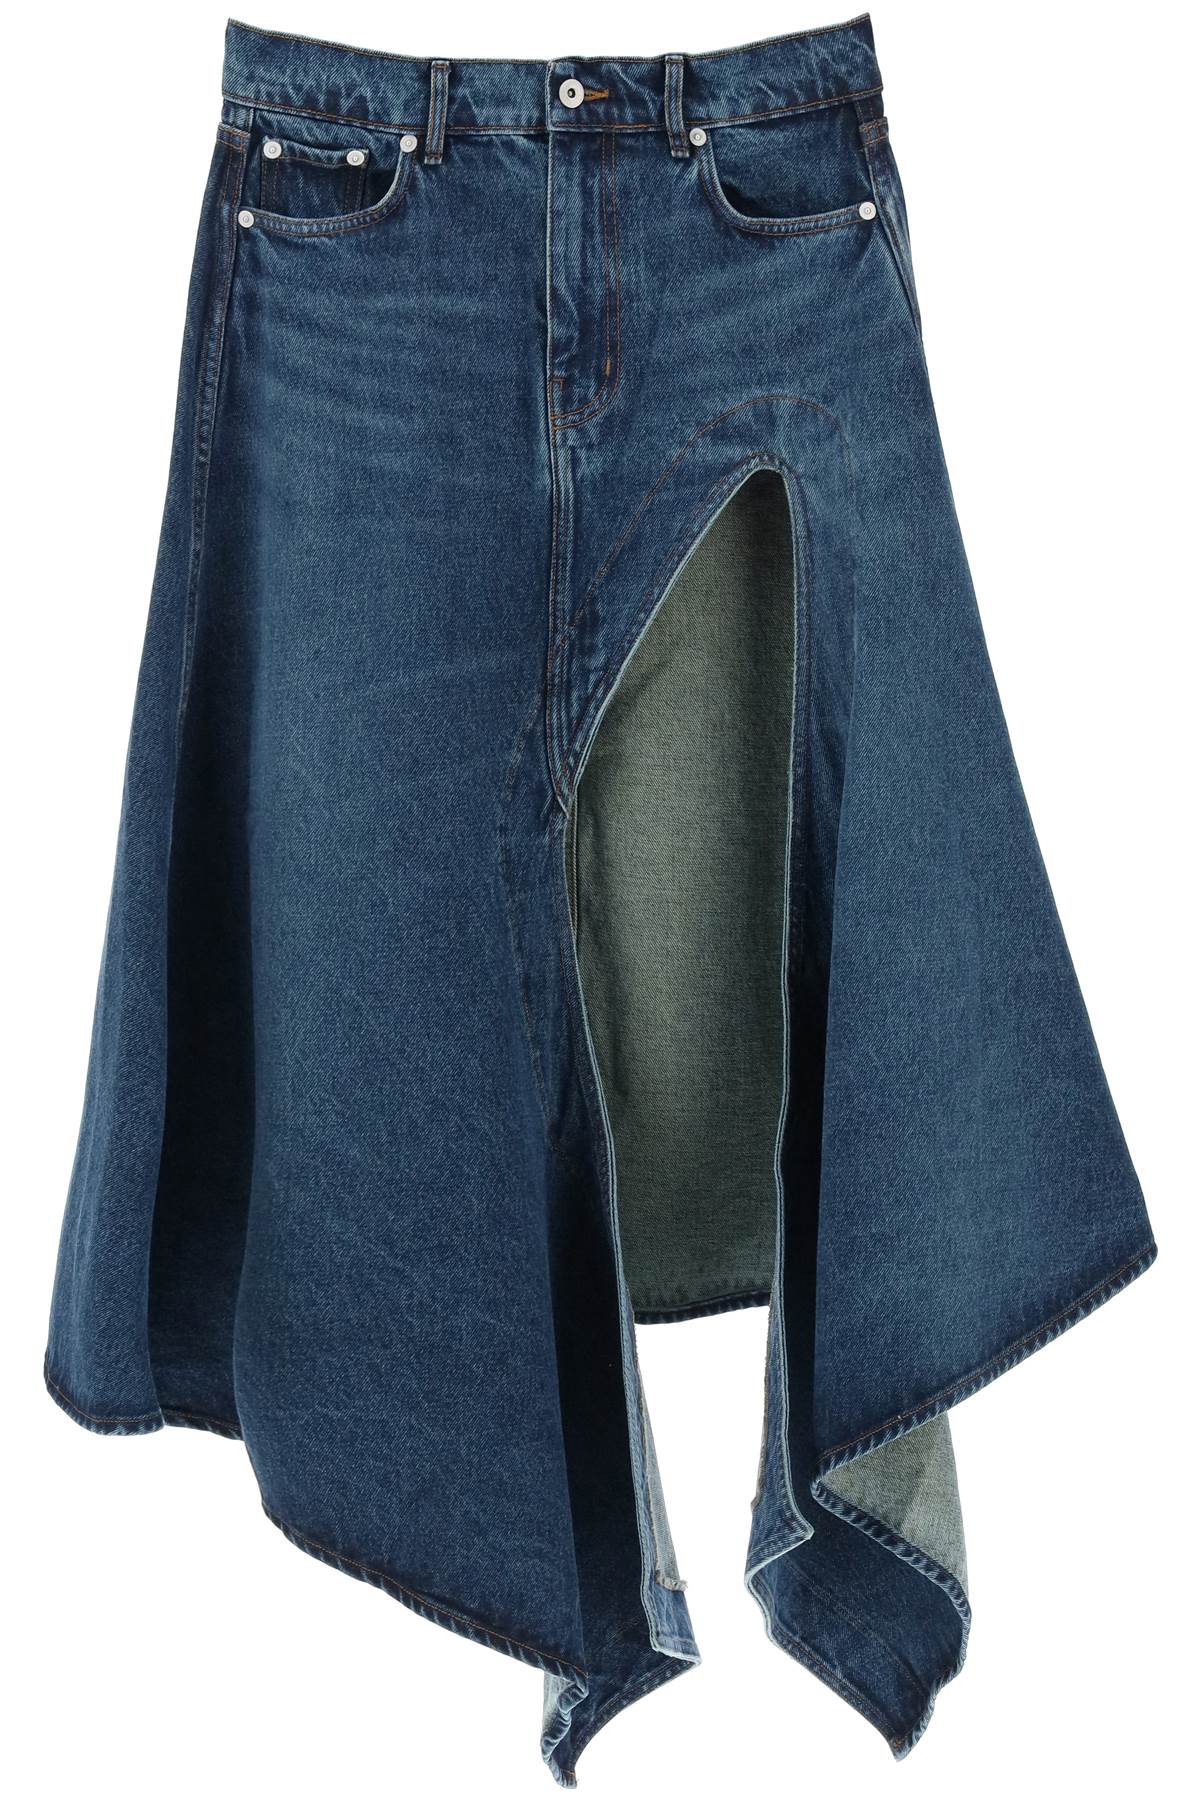 Y project denim midi skirt with cut out details-0